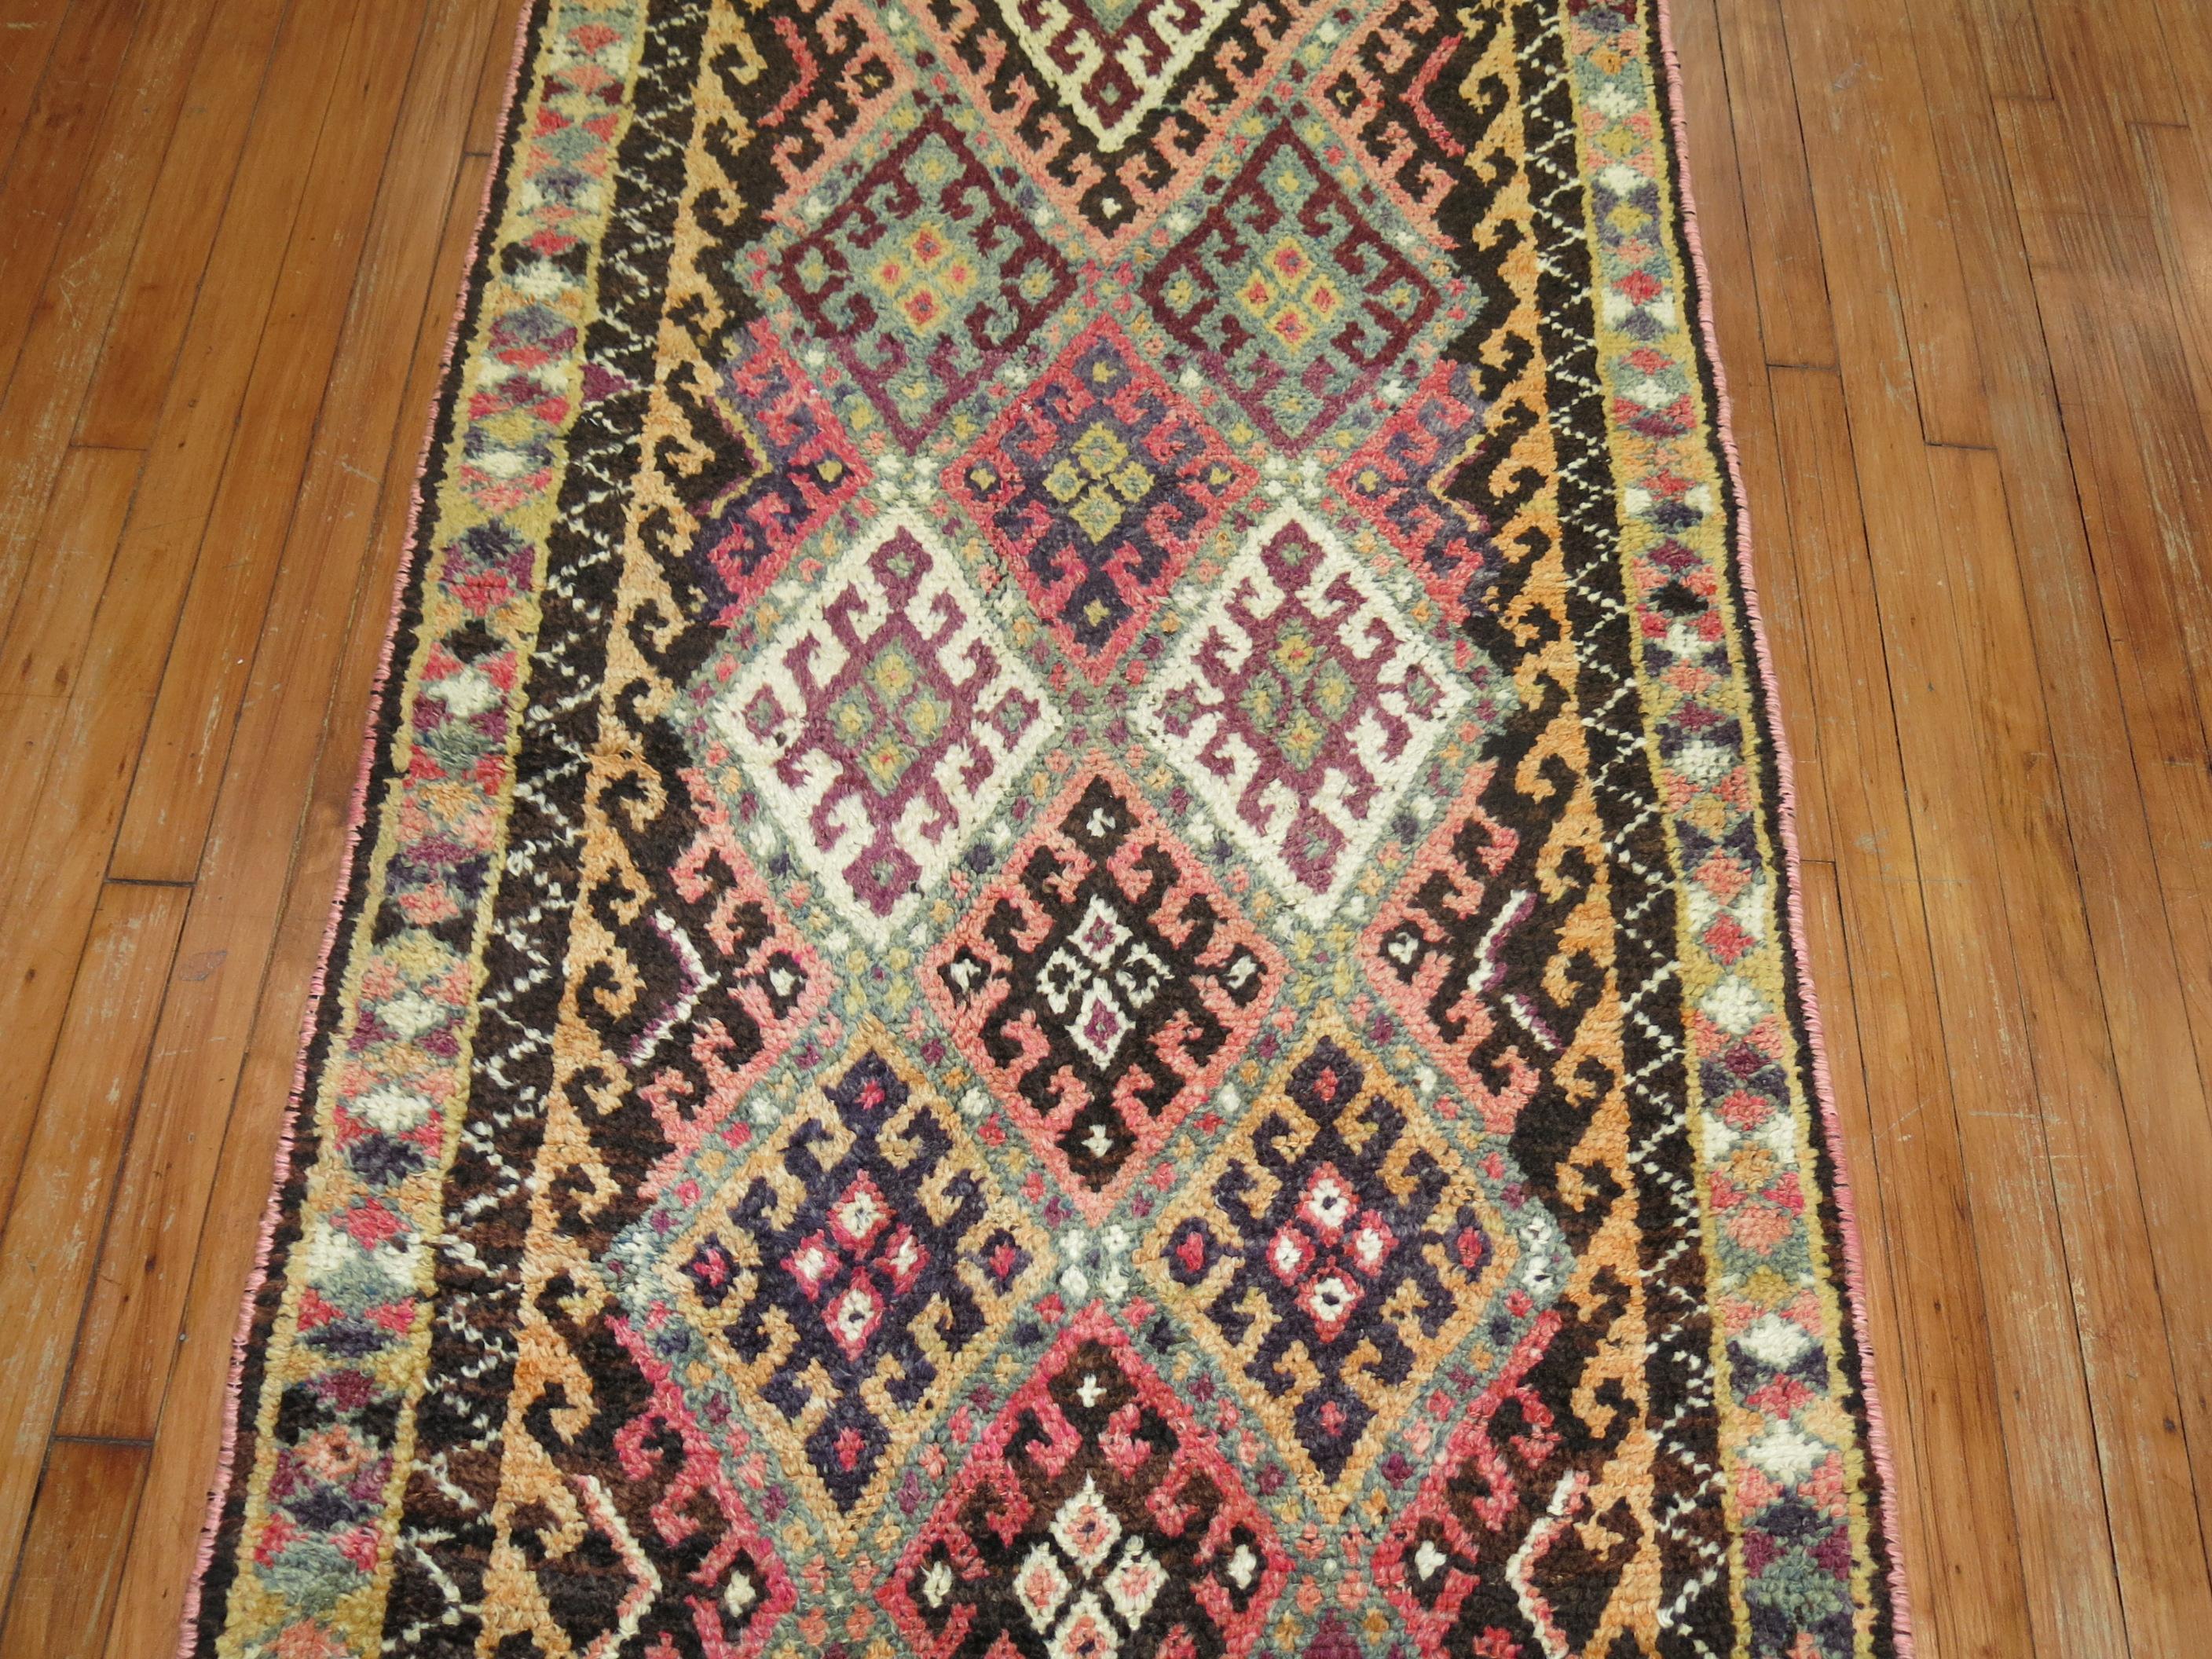 Tribal Turkish Geometric runner from the middle of the 20th century.

Measures: 3'3'' x 15'